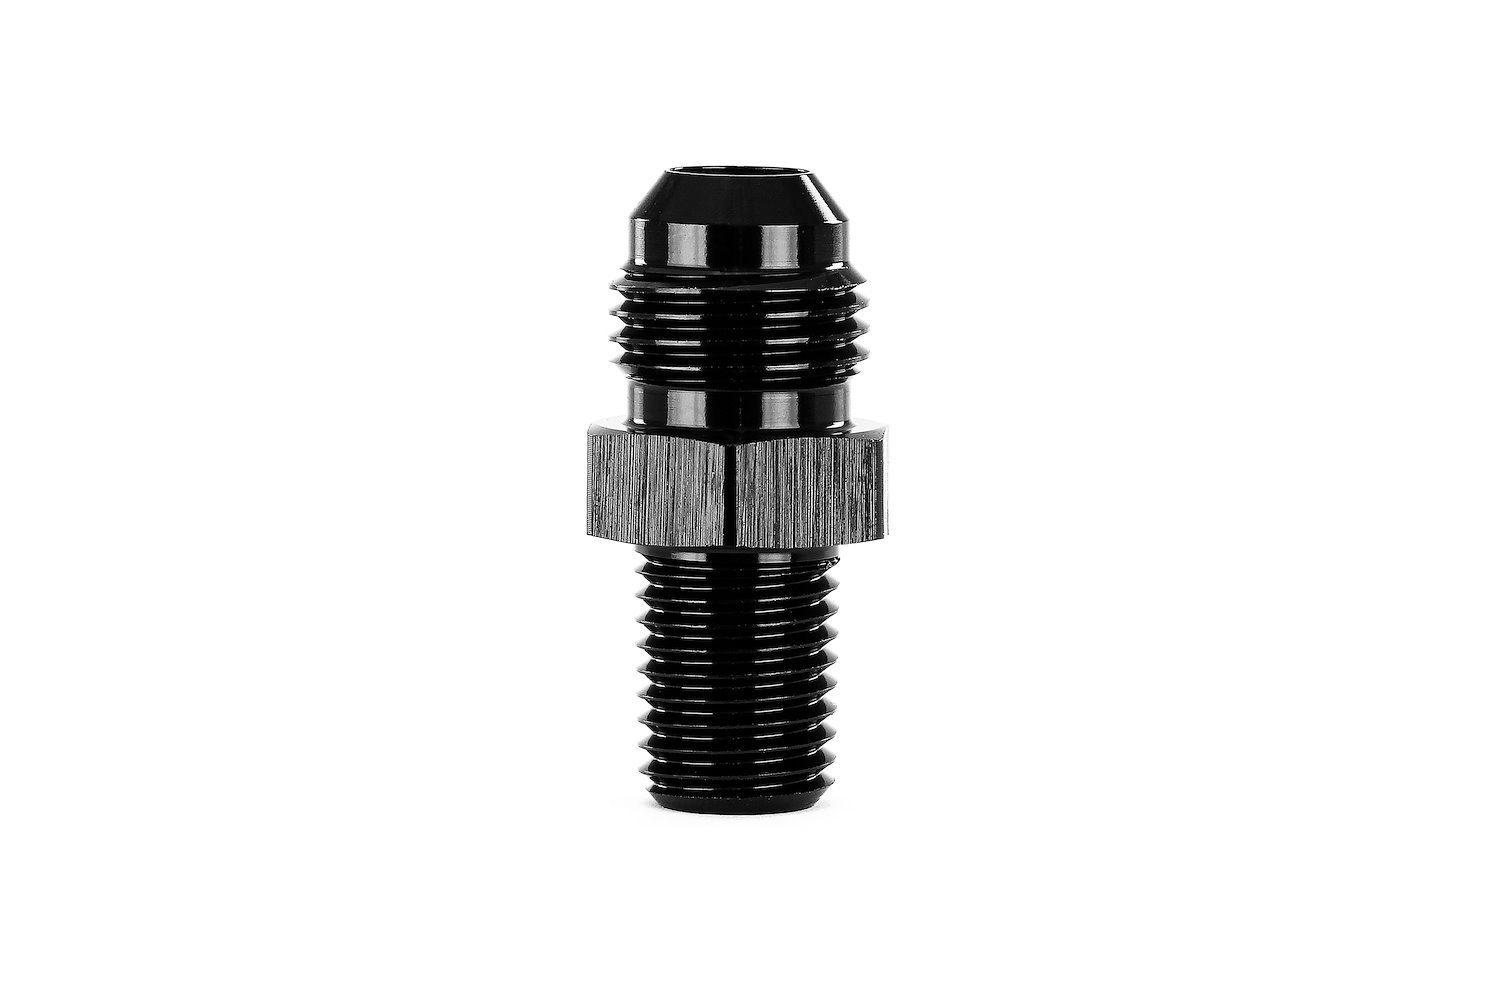 AN81610xM1415 AN Flare to Metric Adapter, Convert Metric Female Threads To Male An Flare